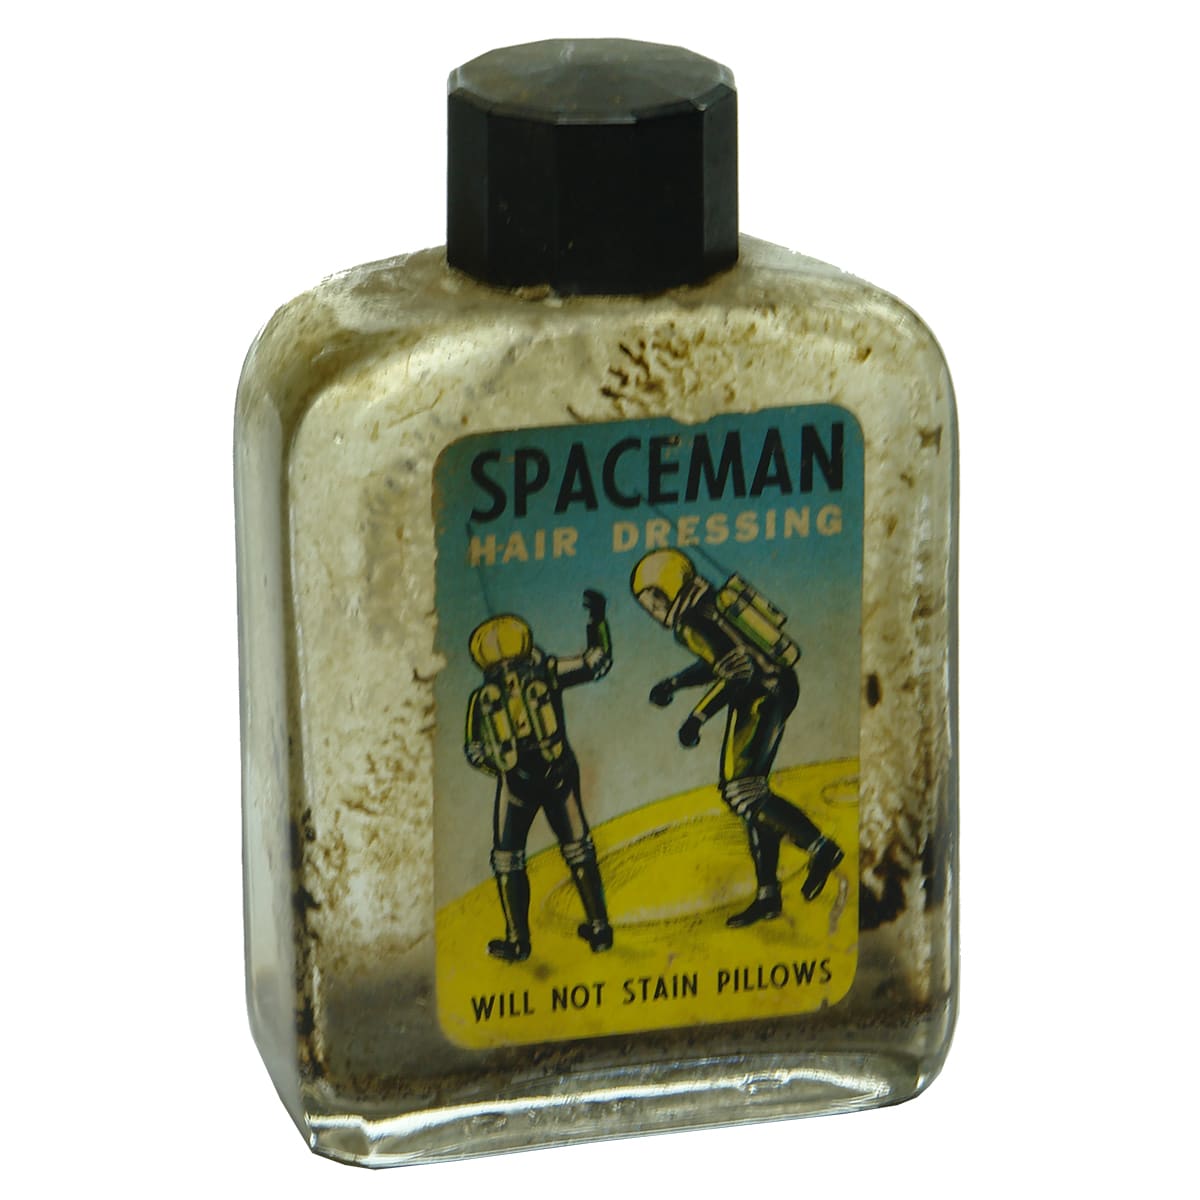 Modern Cosmetics with label for Spaceman Hair Dressing.